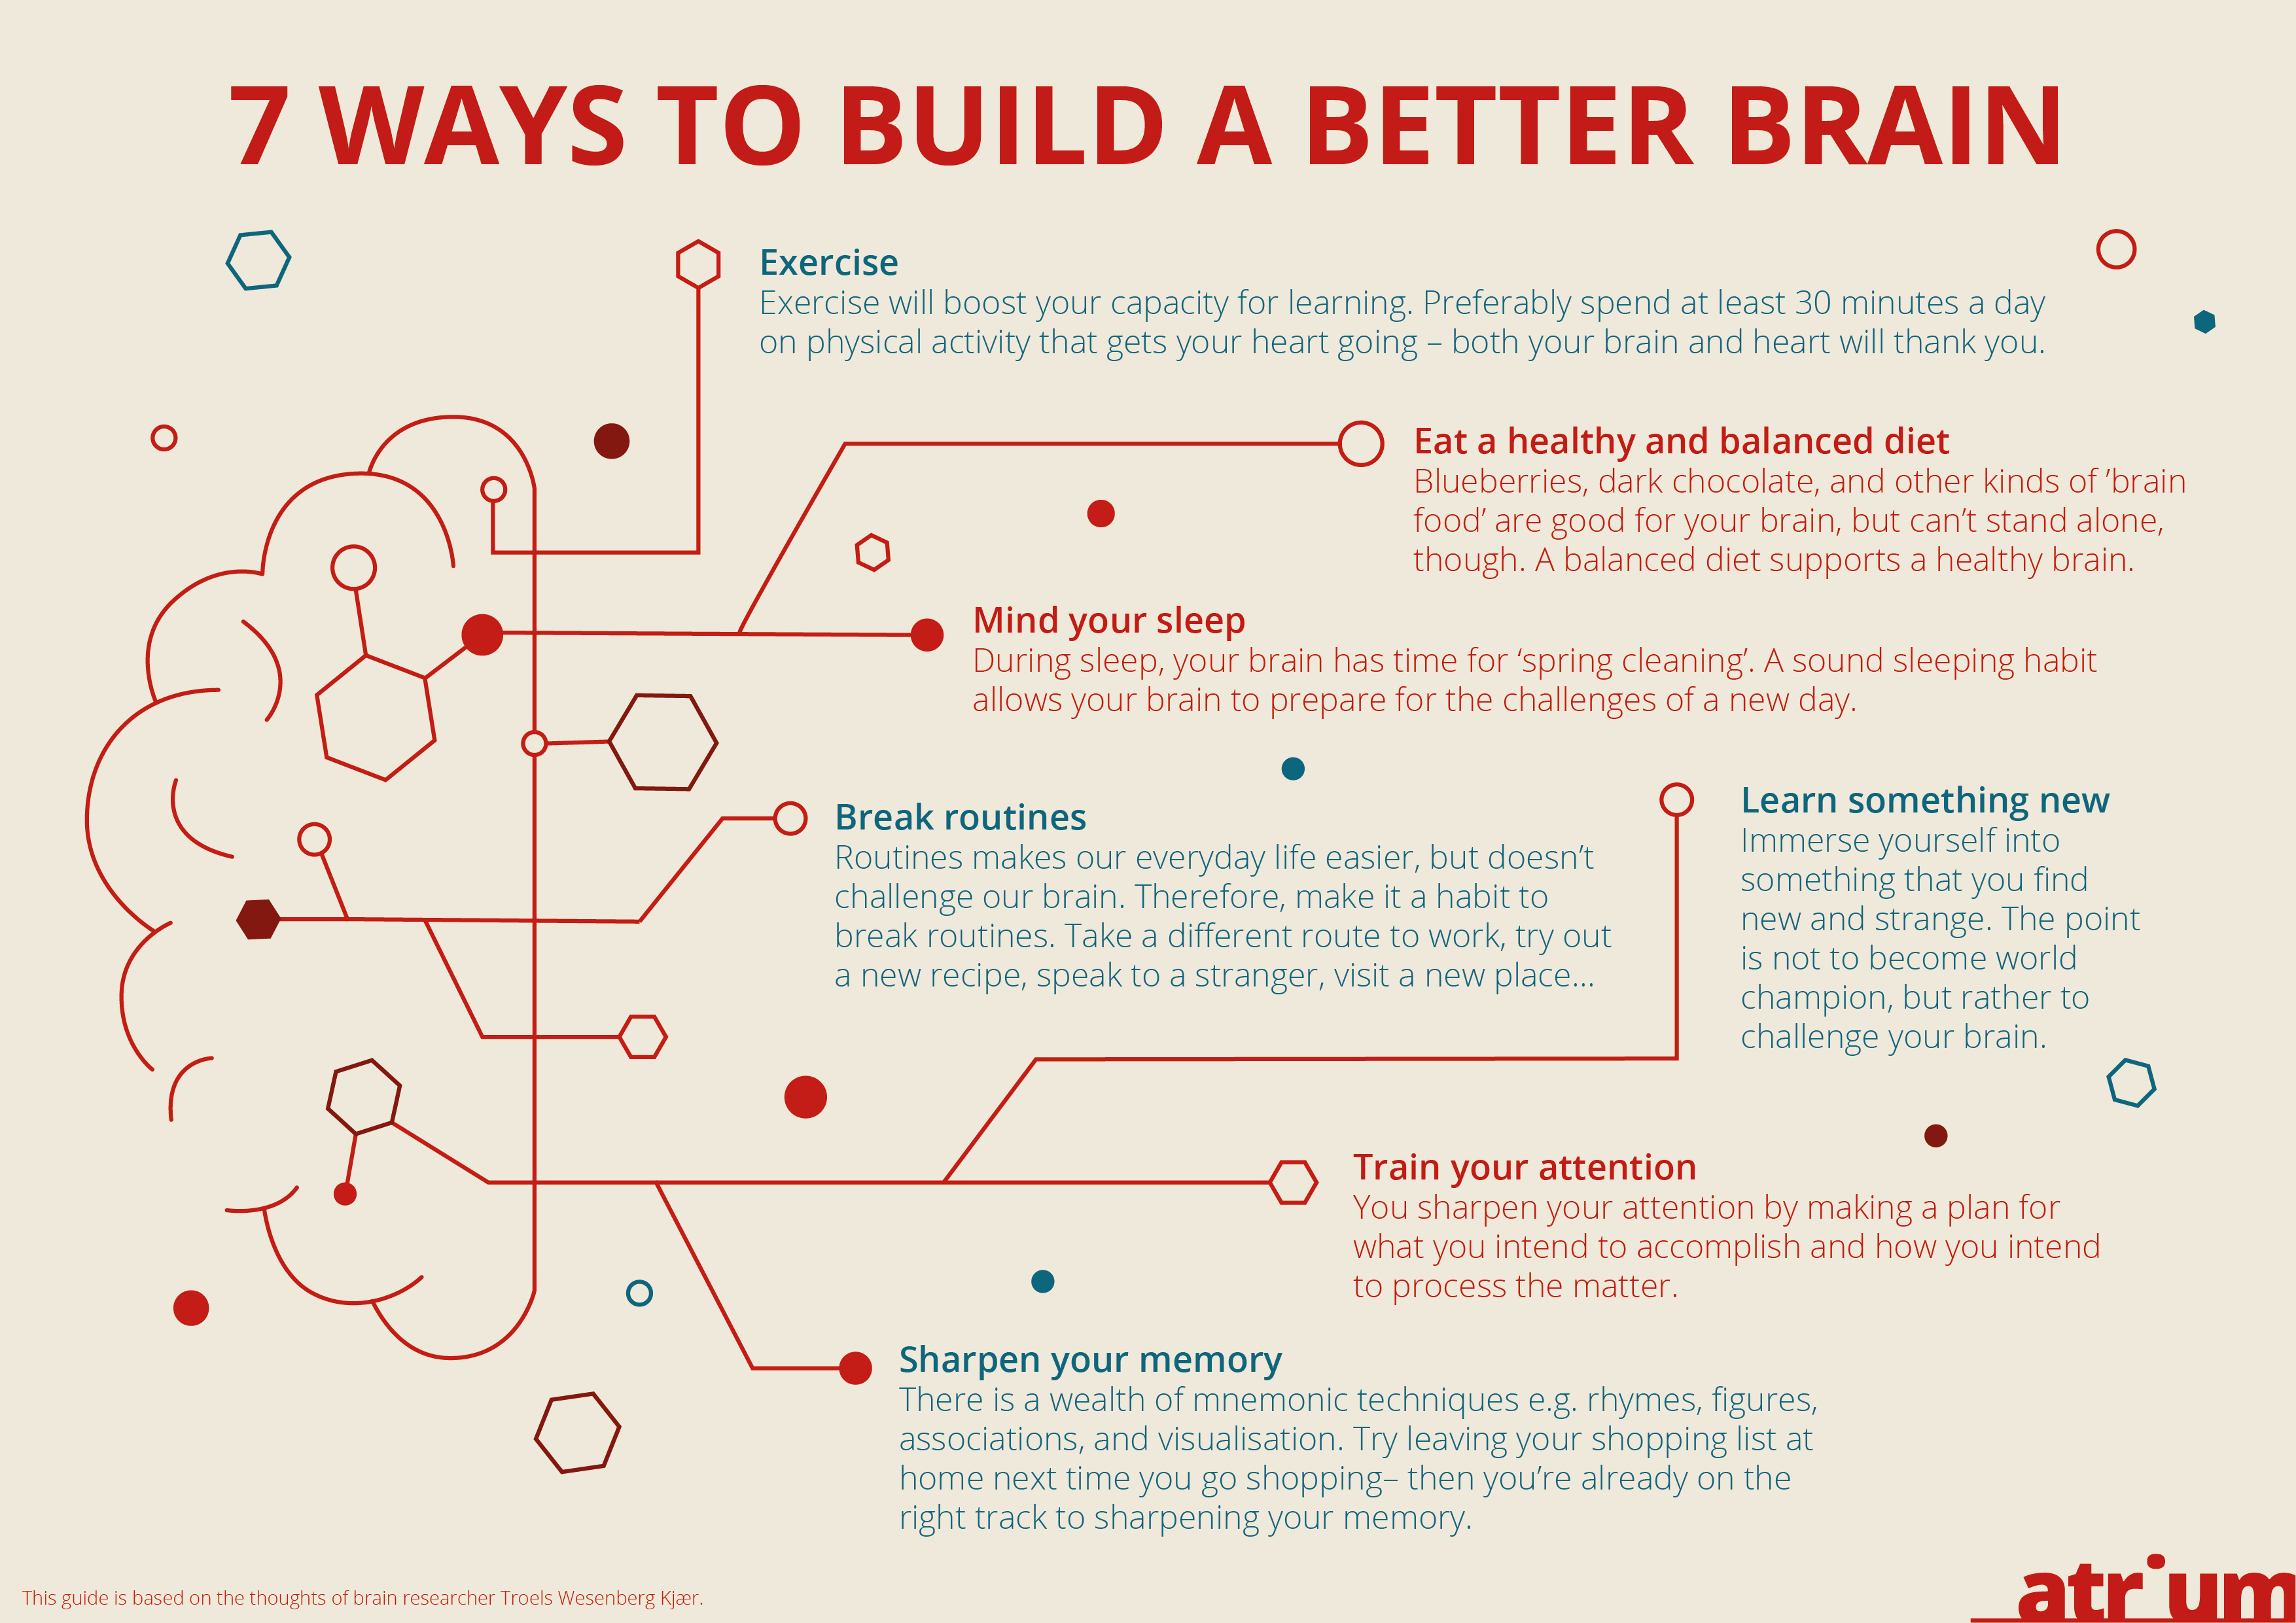 7 ways to build a better brain